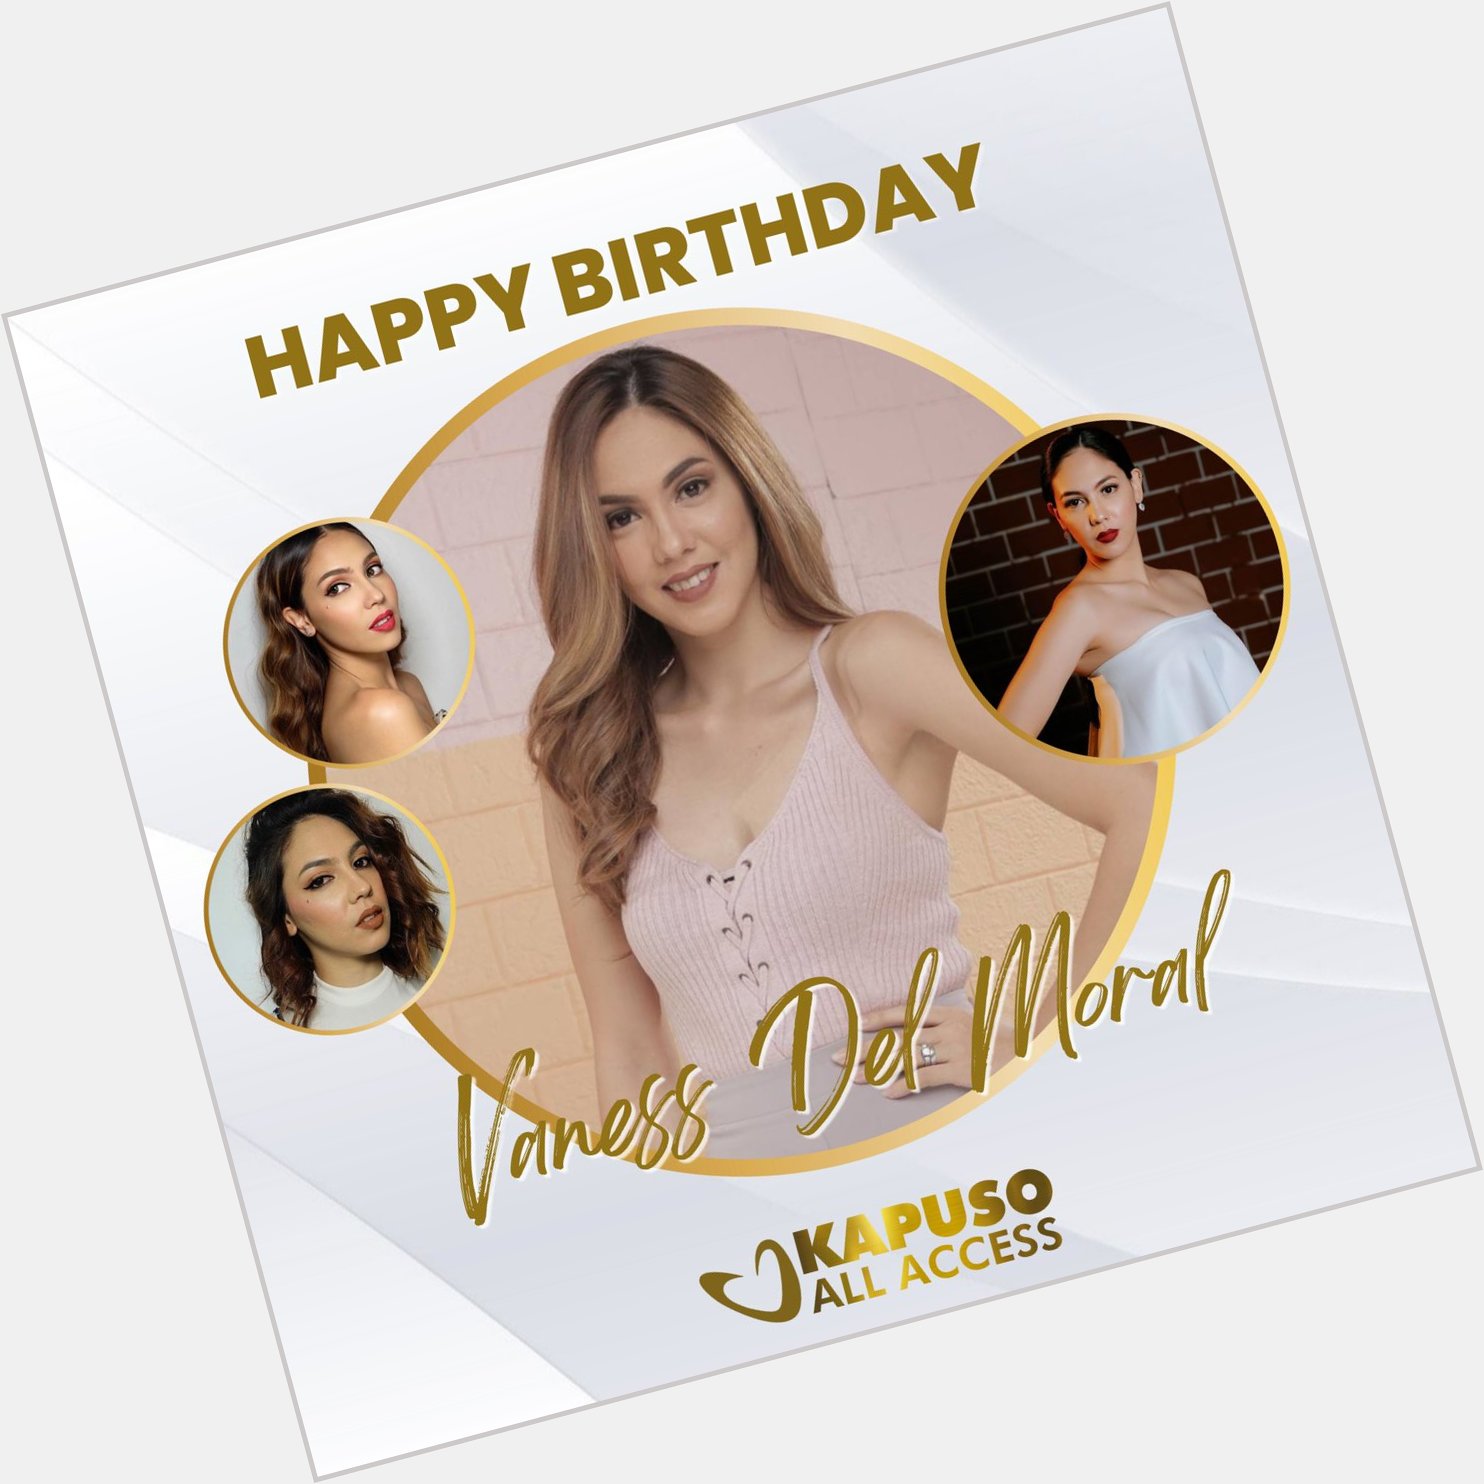 Happy birthday, Vaness Del Moral! Wishing you good health, happiness, and more success.  